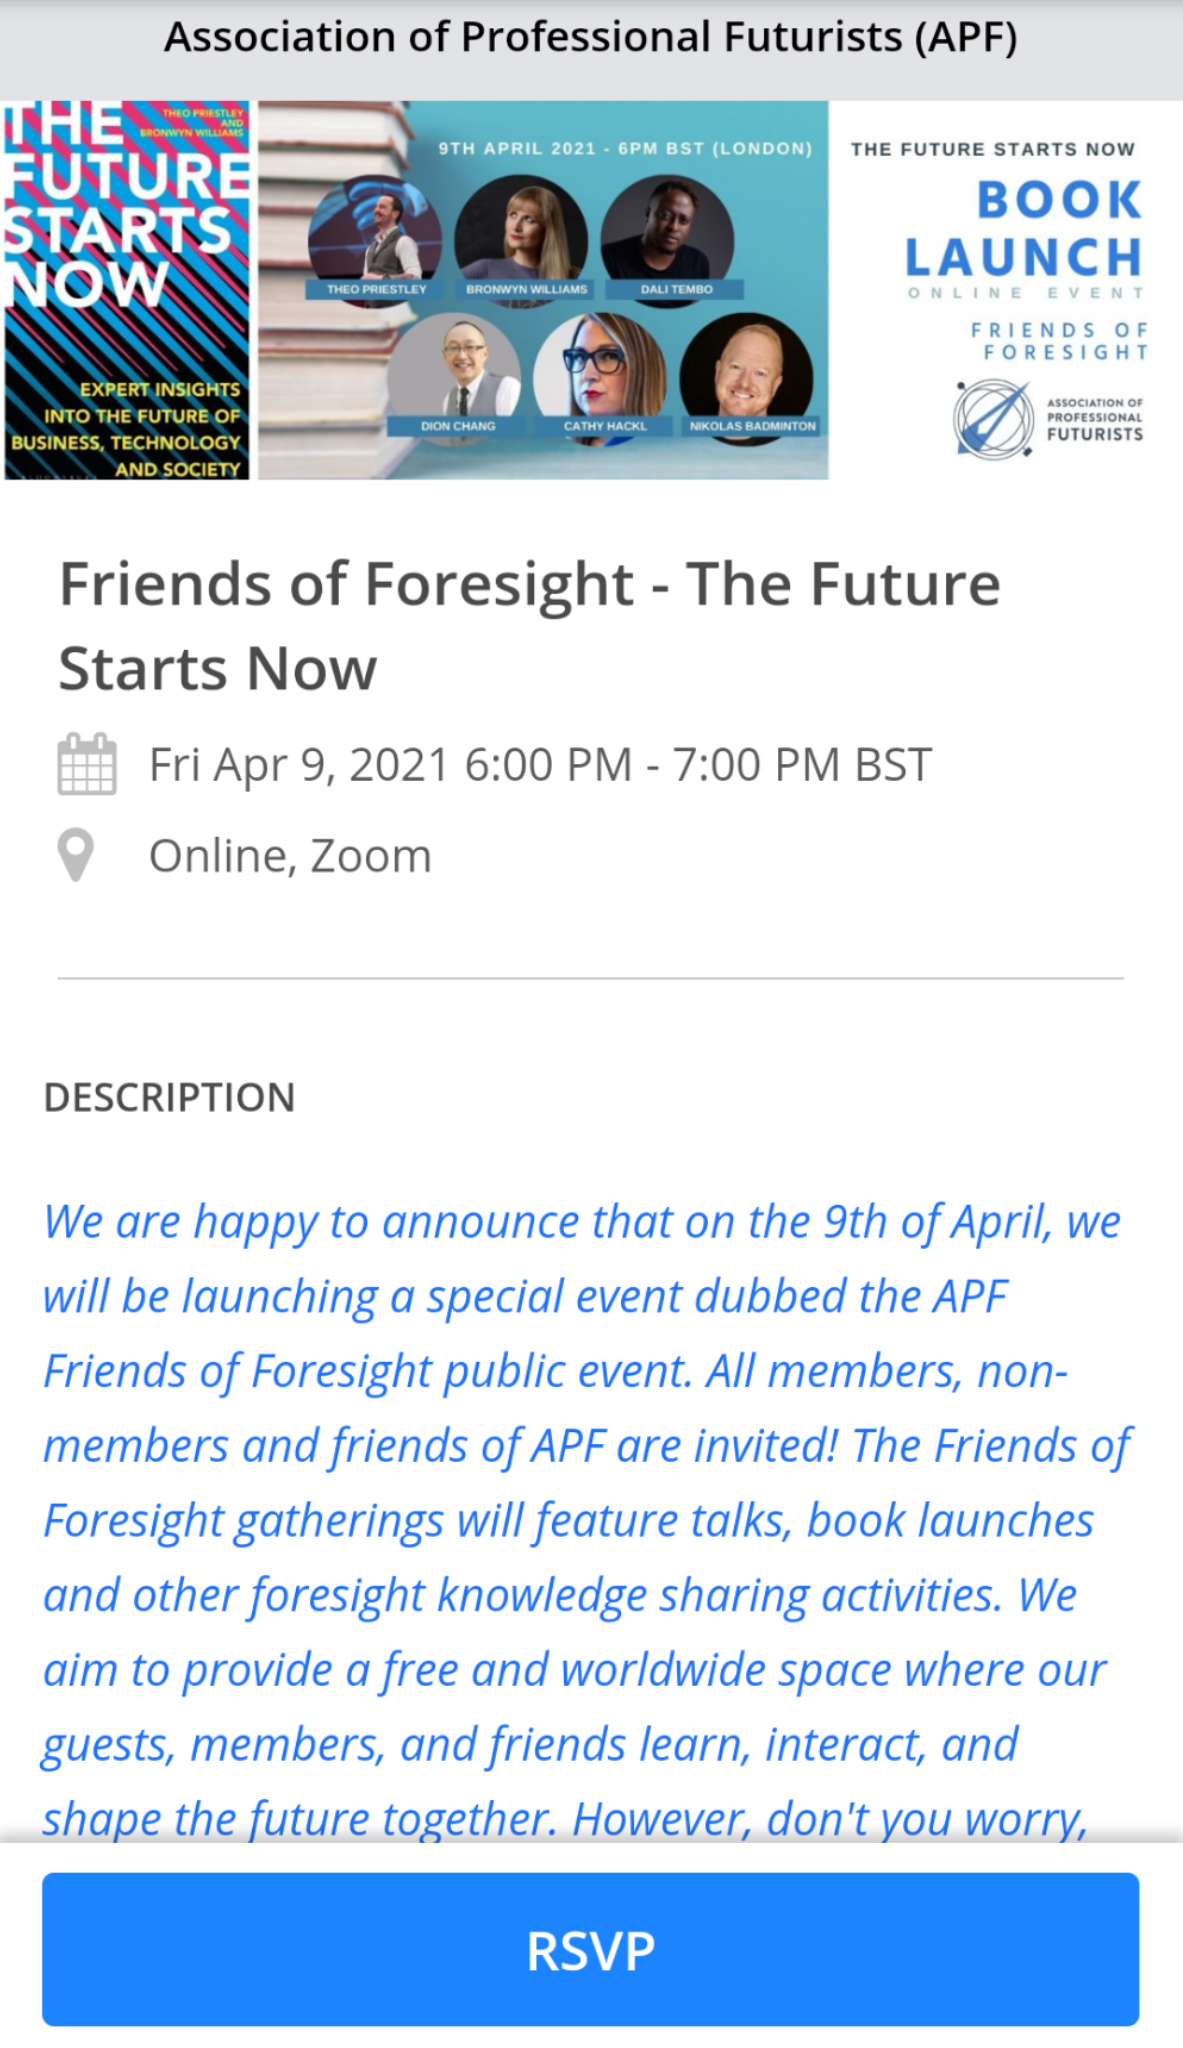 The Association of Professional Futurists  website for their Friends of Foresight event, a public gathering that does not require membership to attend.